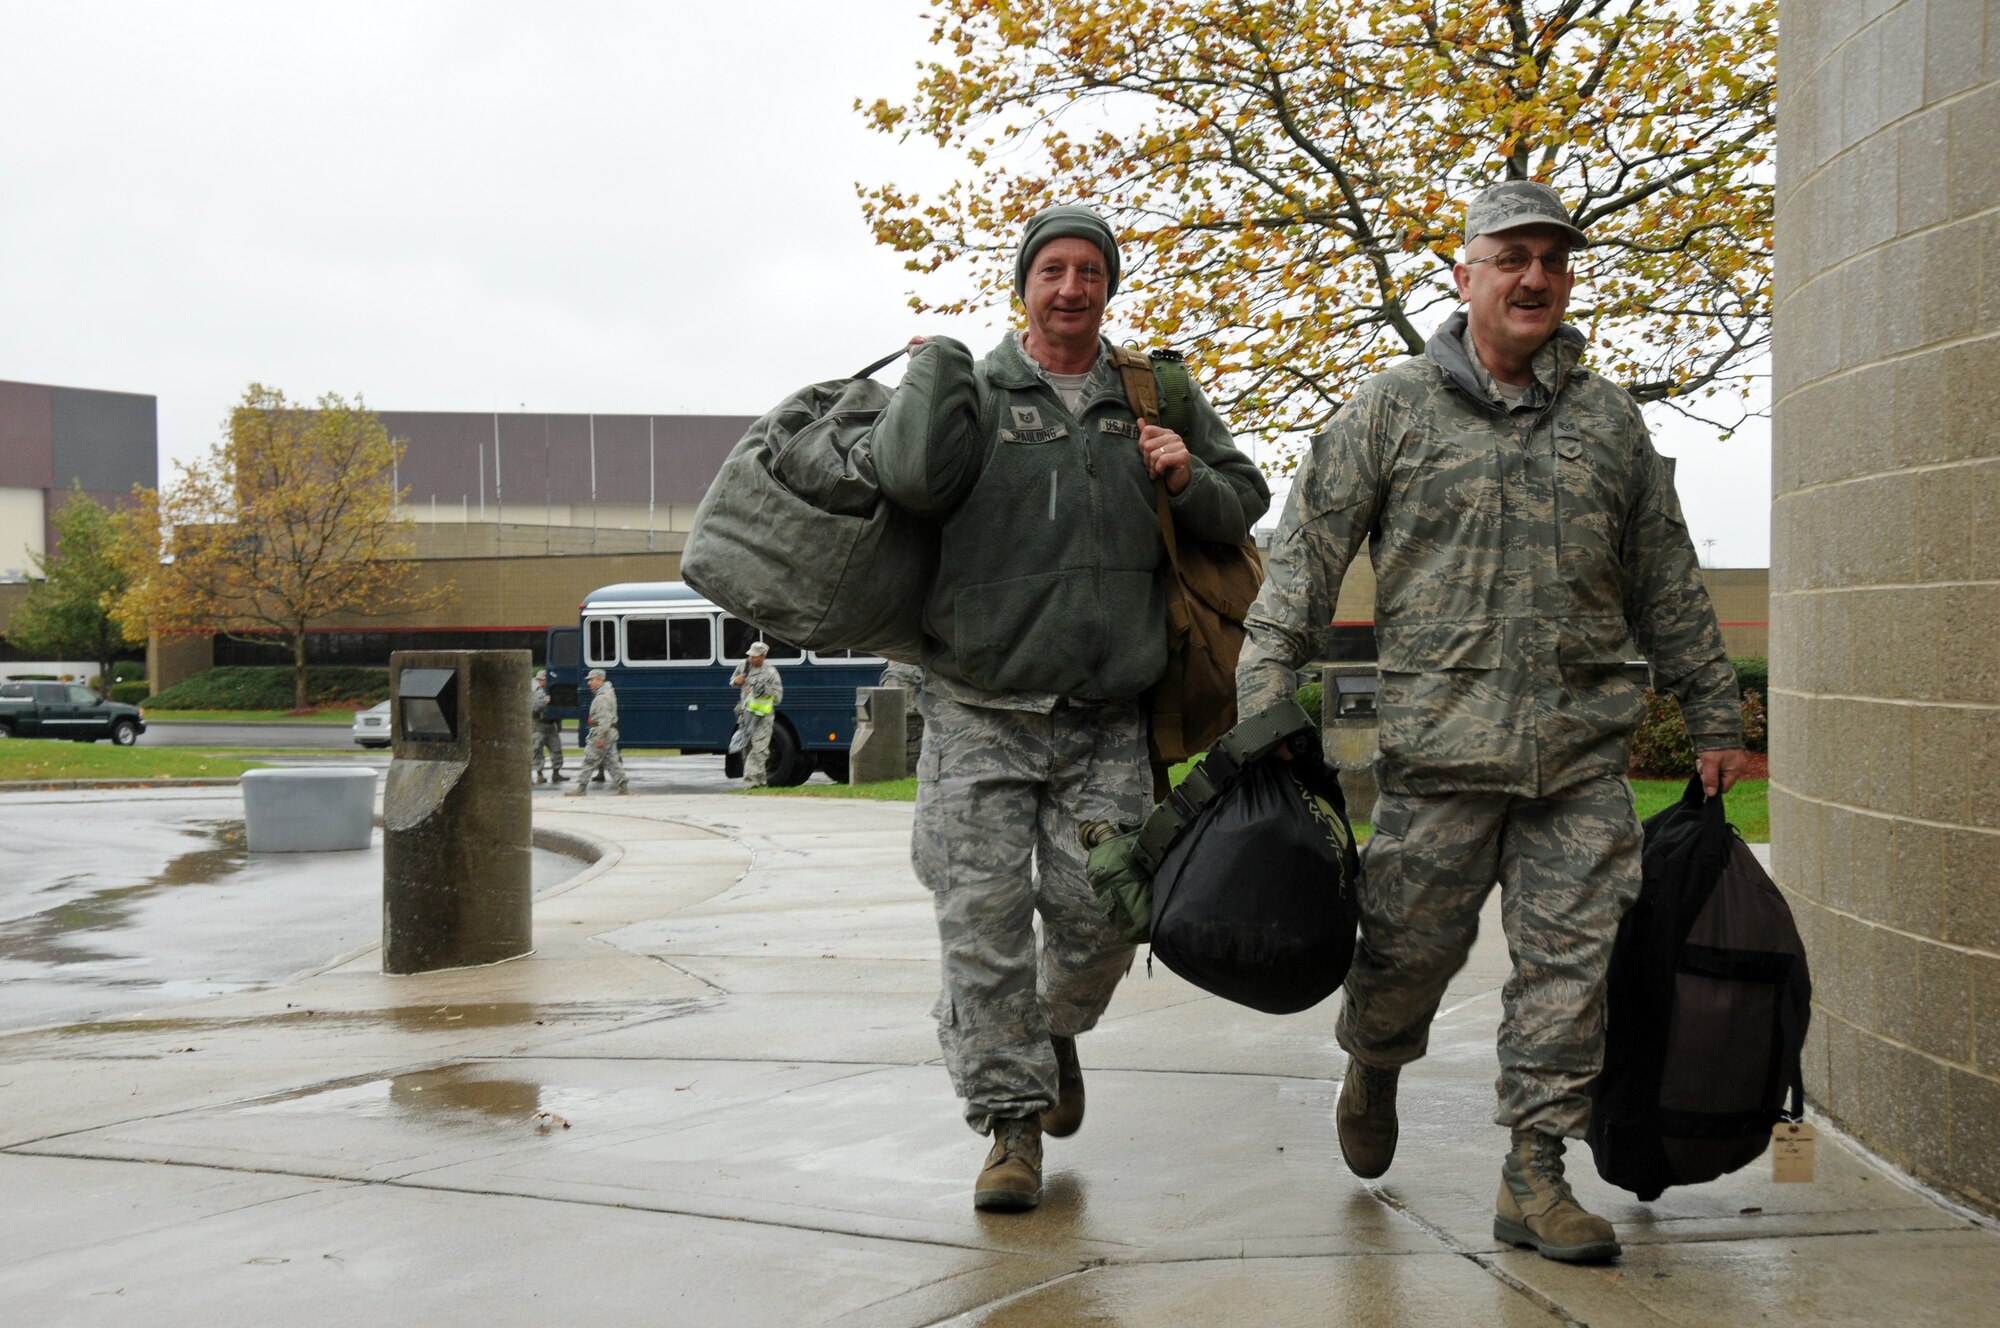 STEWART ANGB, Newburgh, NY --New York Air National Guard Tech. Sgt's. Robert Spaulding and Daryl McKinnon of the 105th Airlift Wing arrive at the 105th Force Support Squadron Personnel Deployment Function as part of the New York State response to Hurricane Sandy on Monday, Oct. 29. The airmen are among more than 1,100 Army and Air National Guard Soldiers and Airmen deployed at the order of New York Governor Andrew M. Cuomo to respond to the storm. (National Guard photo by Tech. Sgt. Michael OHalloran)(Released)